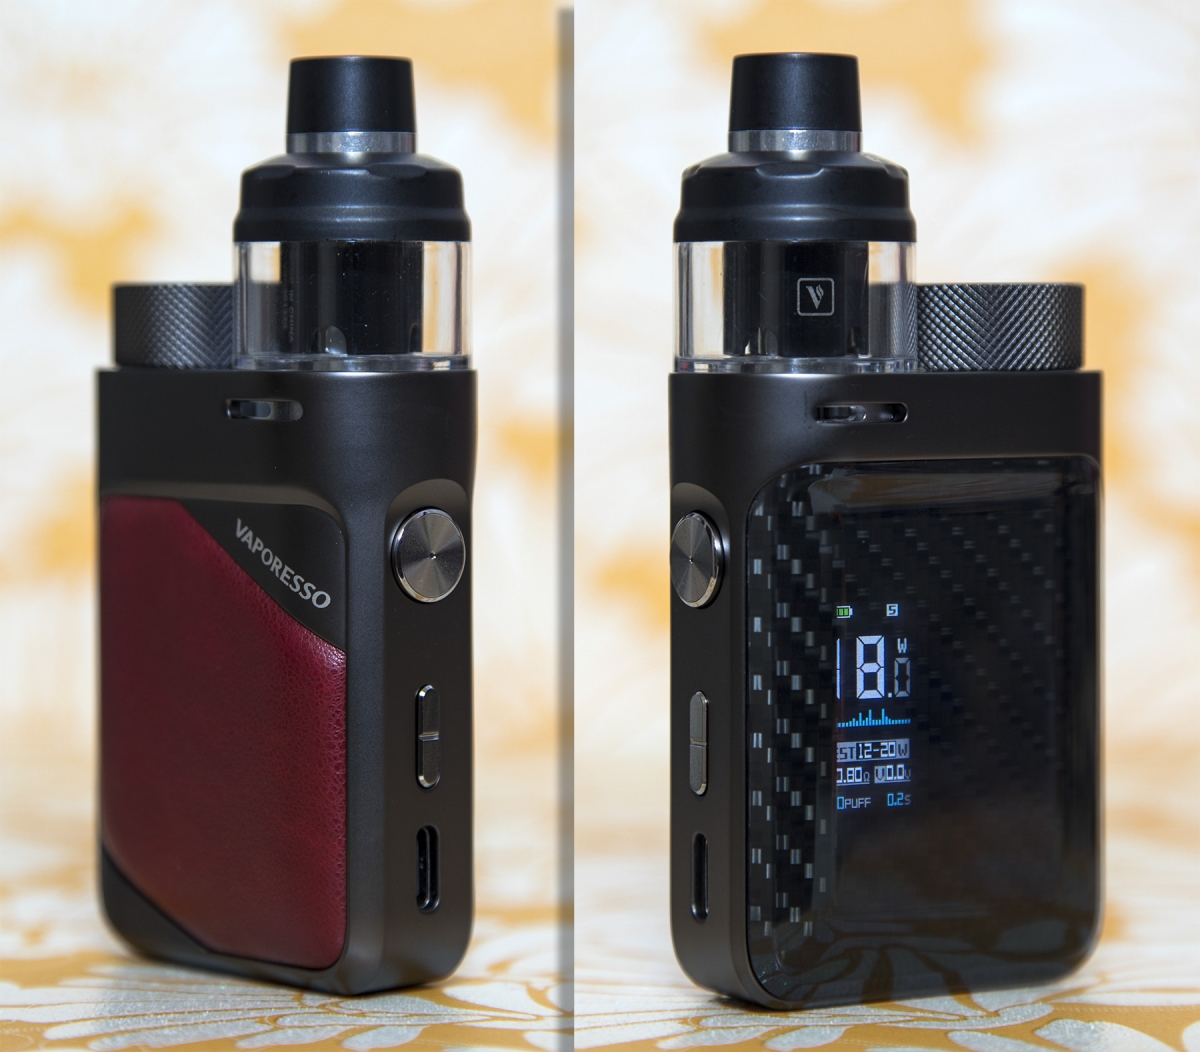 Vaporesso Swag PX80 screen and leather